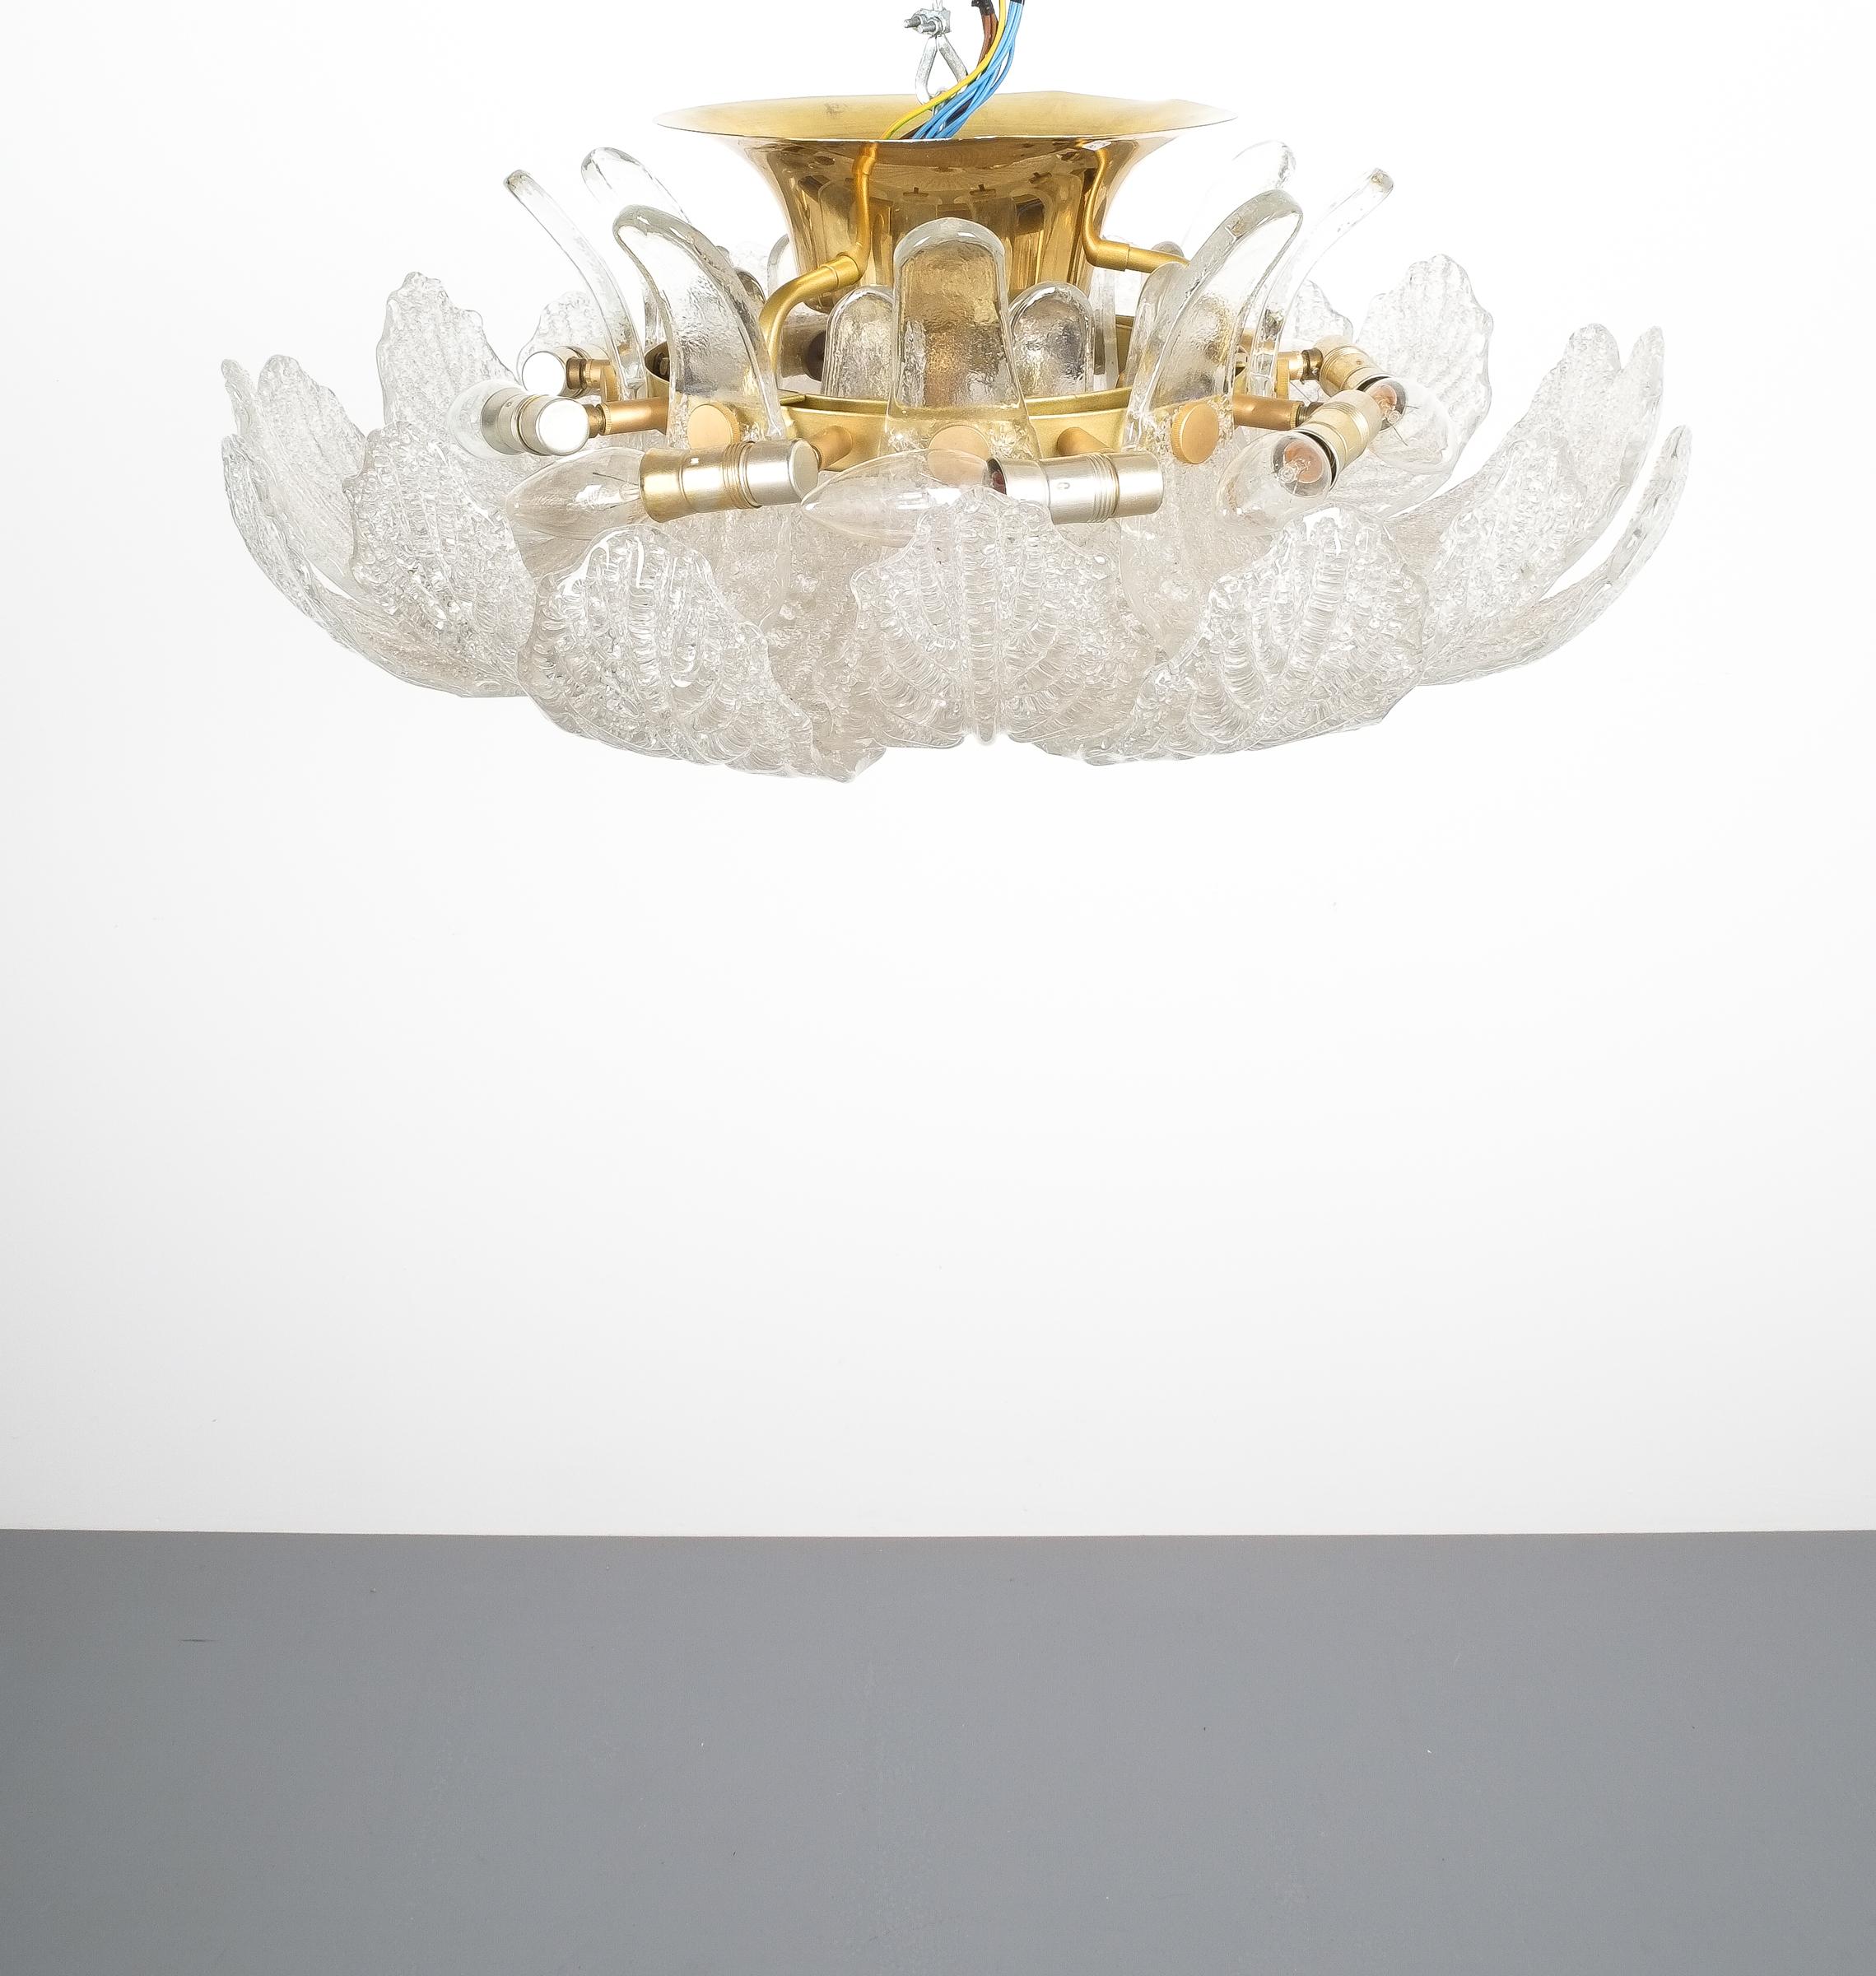 Mid-20th Century Labelled Barovier Toso Flush Mount or Chandelier Glass Brass, Italy Midcentury